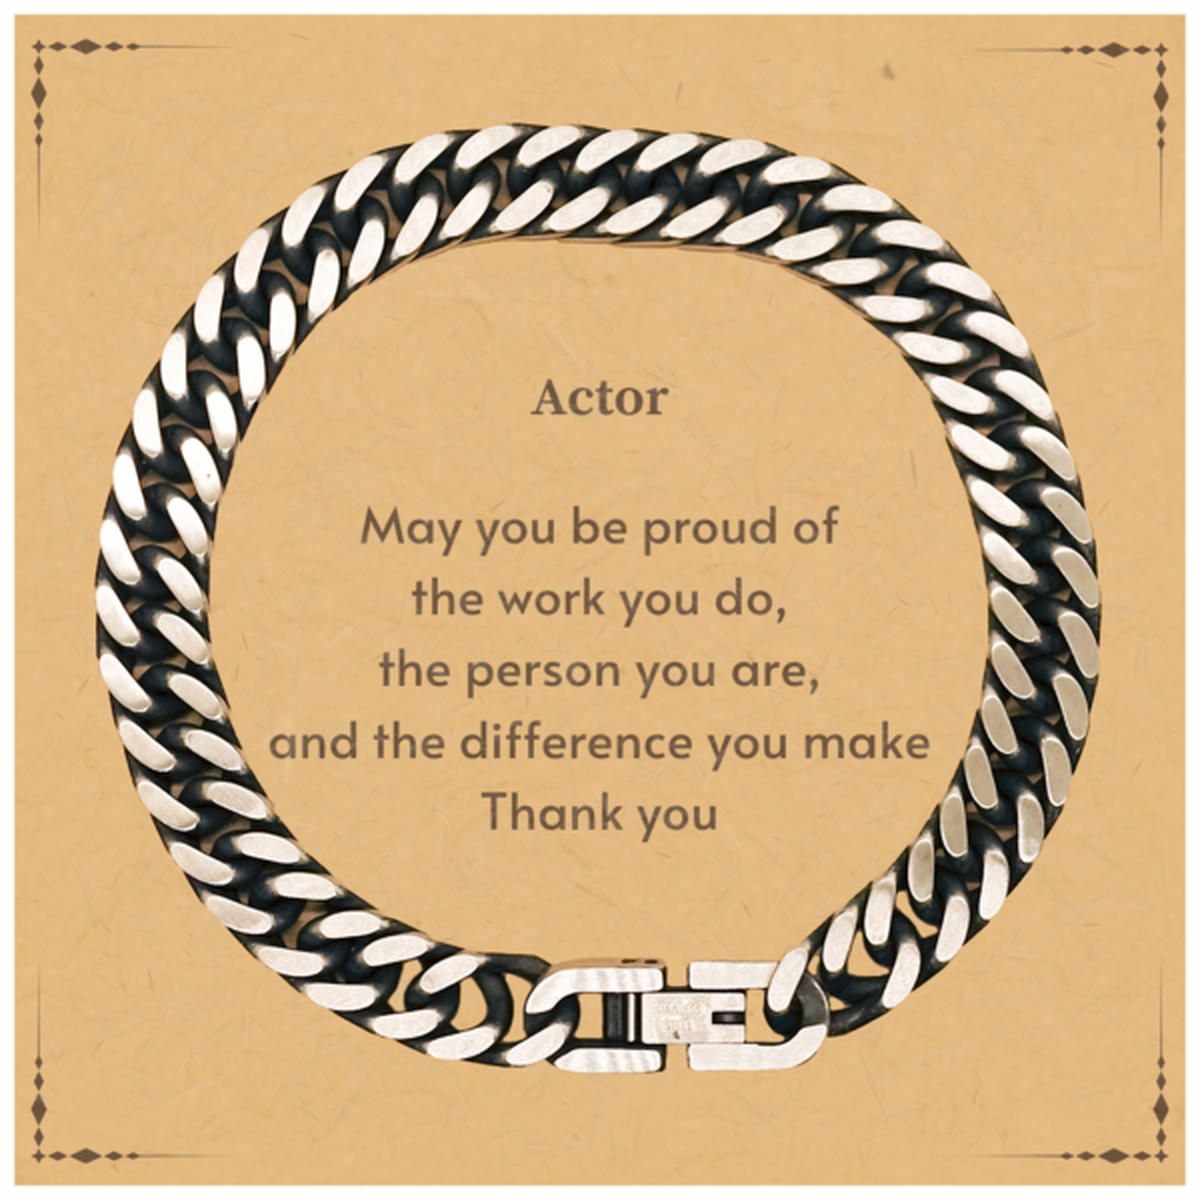 Heartwarming Cuban Link Chain Bracelet Retirement Coworkers Gifts for Actor, Actor May You be proud of the work you do, the person you are Gifts for Boss Men Women Friends